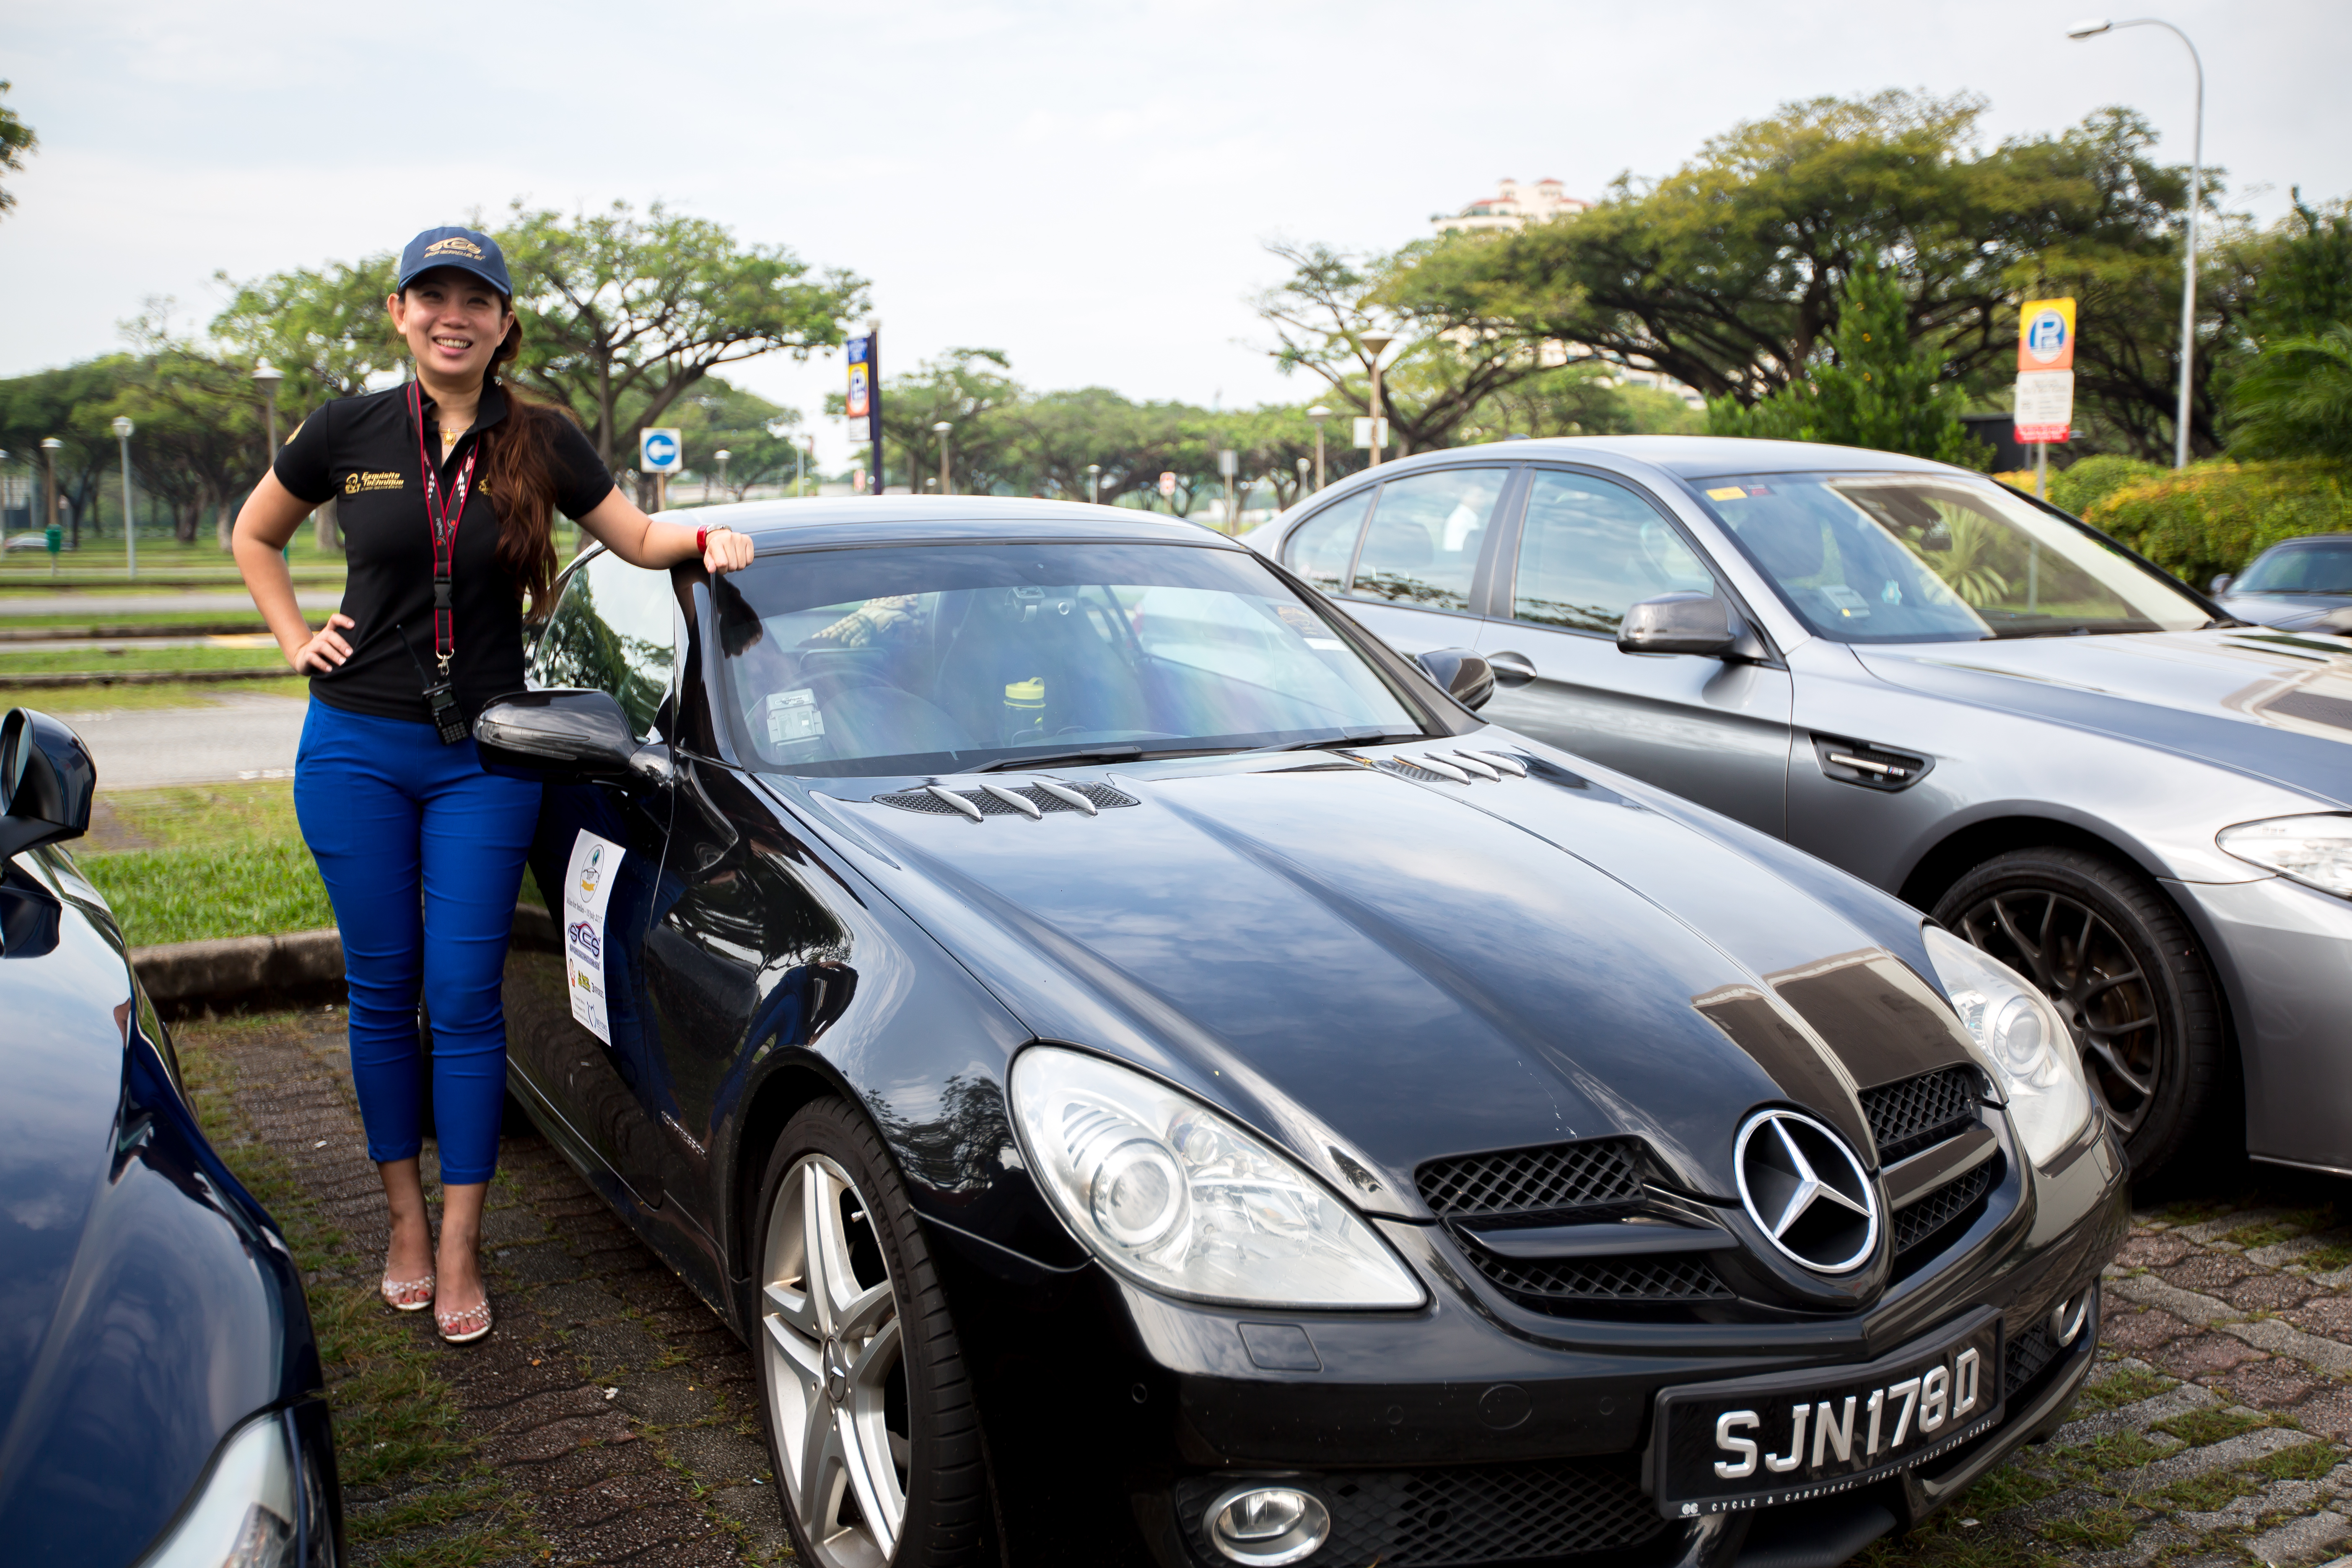 Miles for Smiles: Bringing Joy and Inspiration with Sports Cars